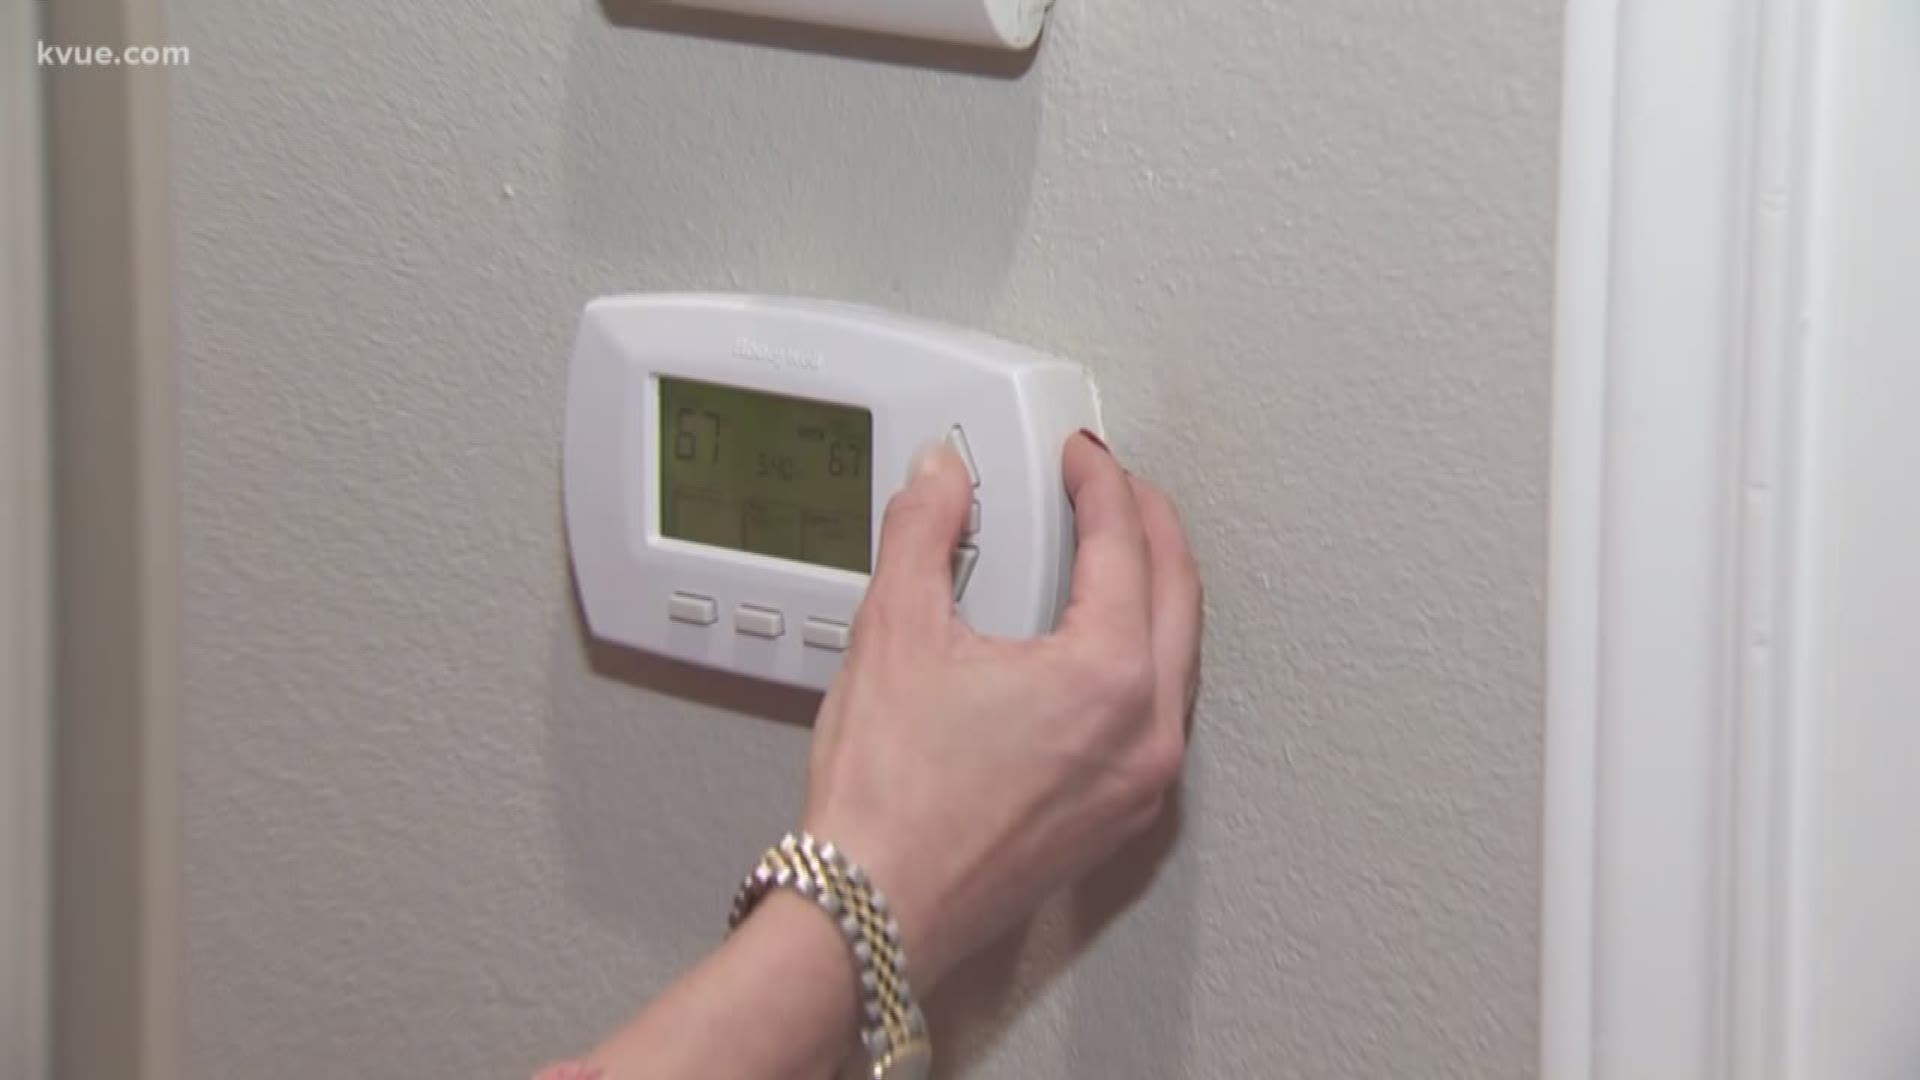 Freezing temperatures in Central Texas set a new record for electricity use. According to the Electric Reliability Council of Texas, that new record was set this morning between the 7 and 8 a.m. hour.